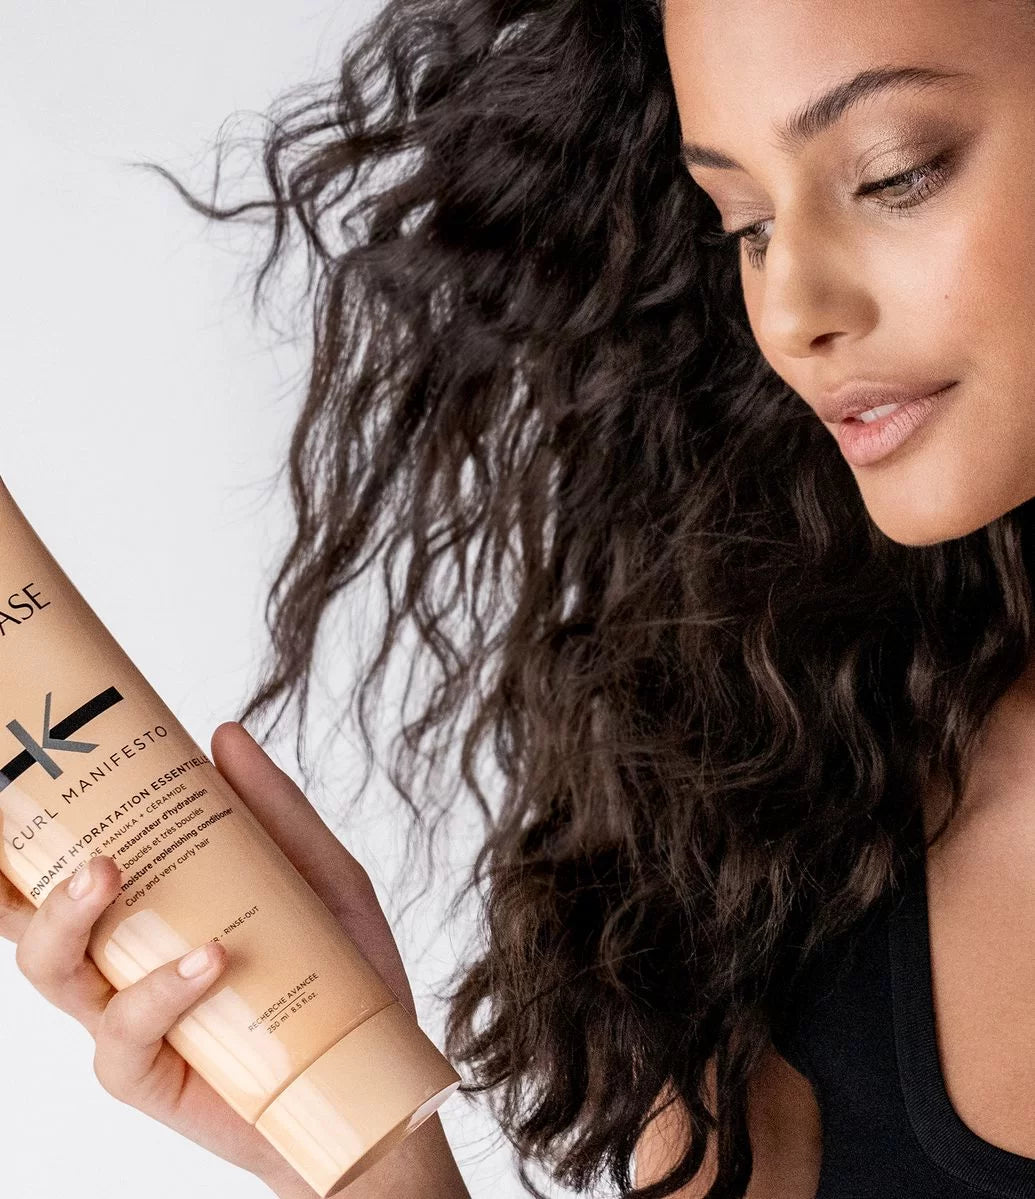 Girl with curly hair holding a Kérastase curl manifesto product